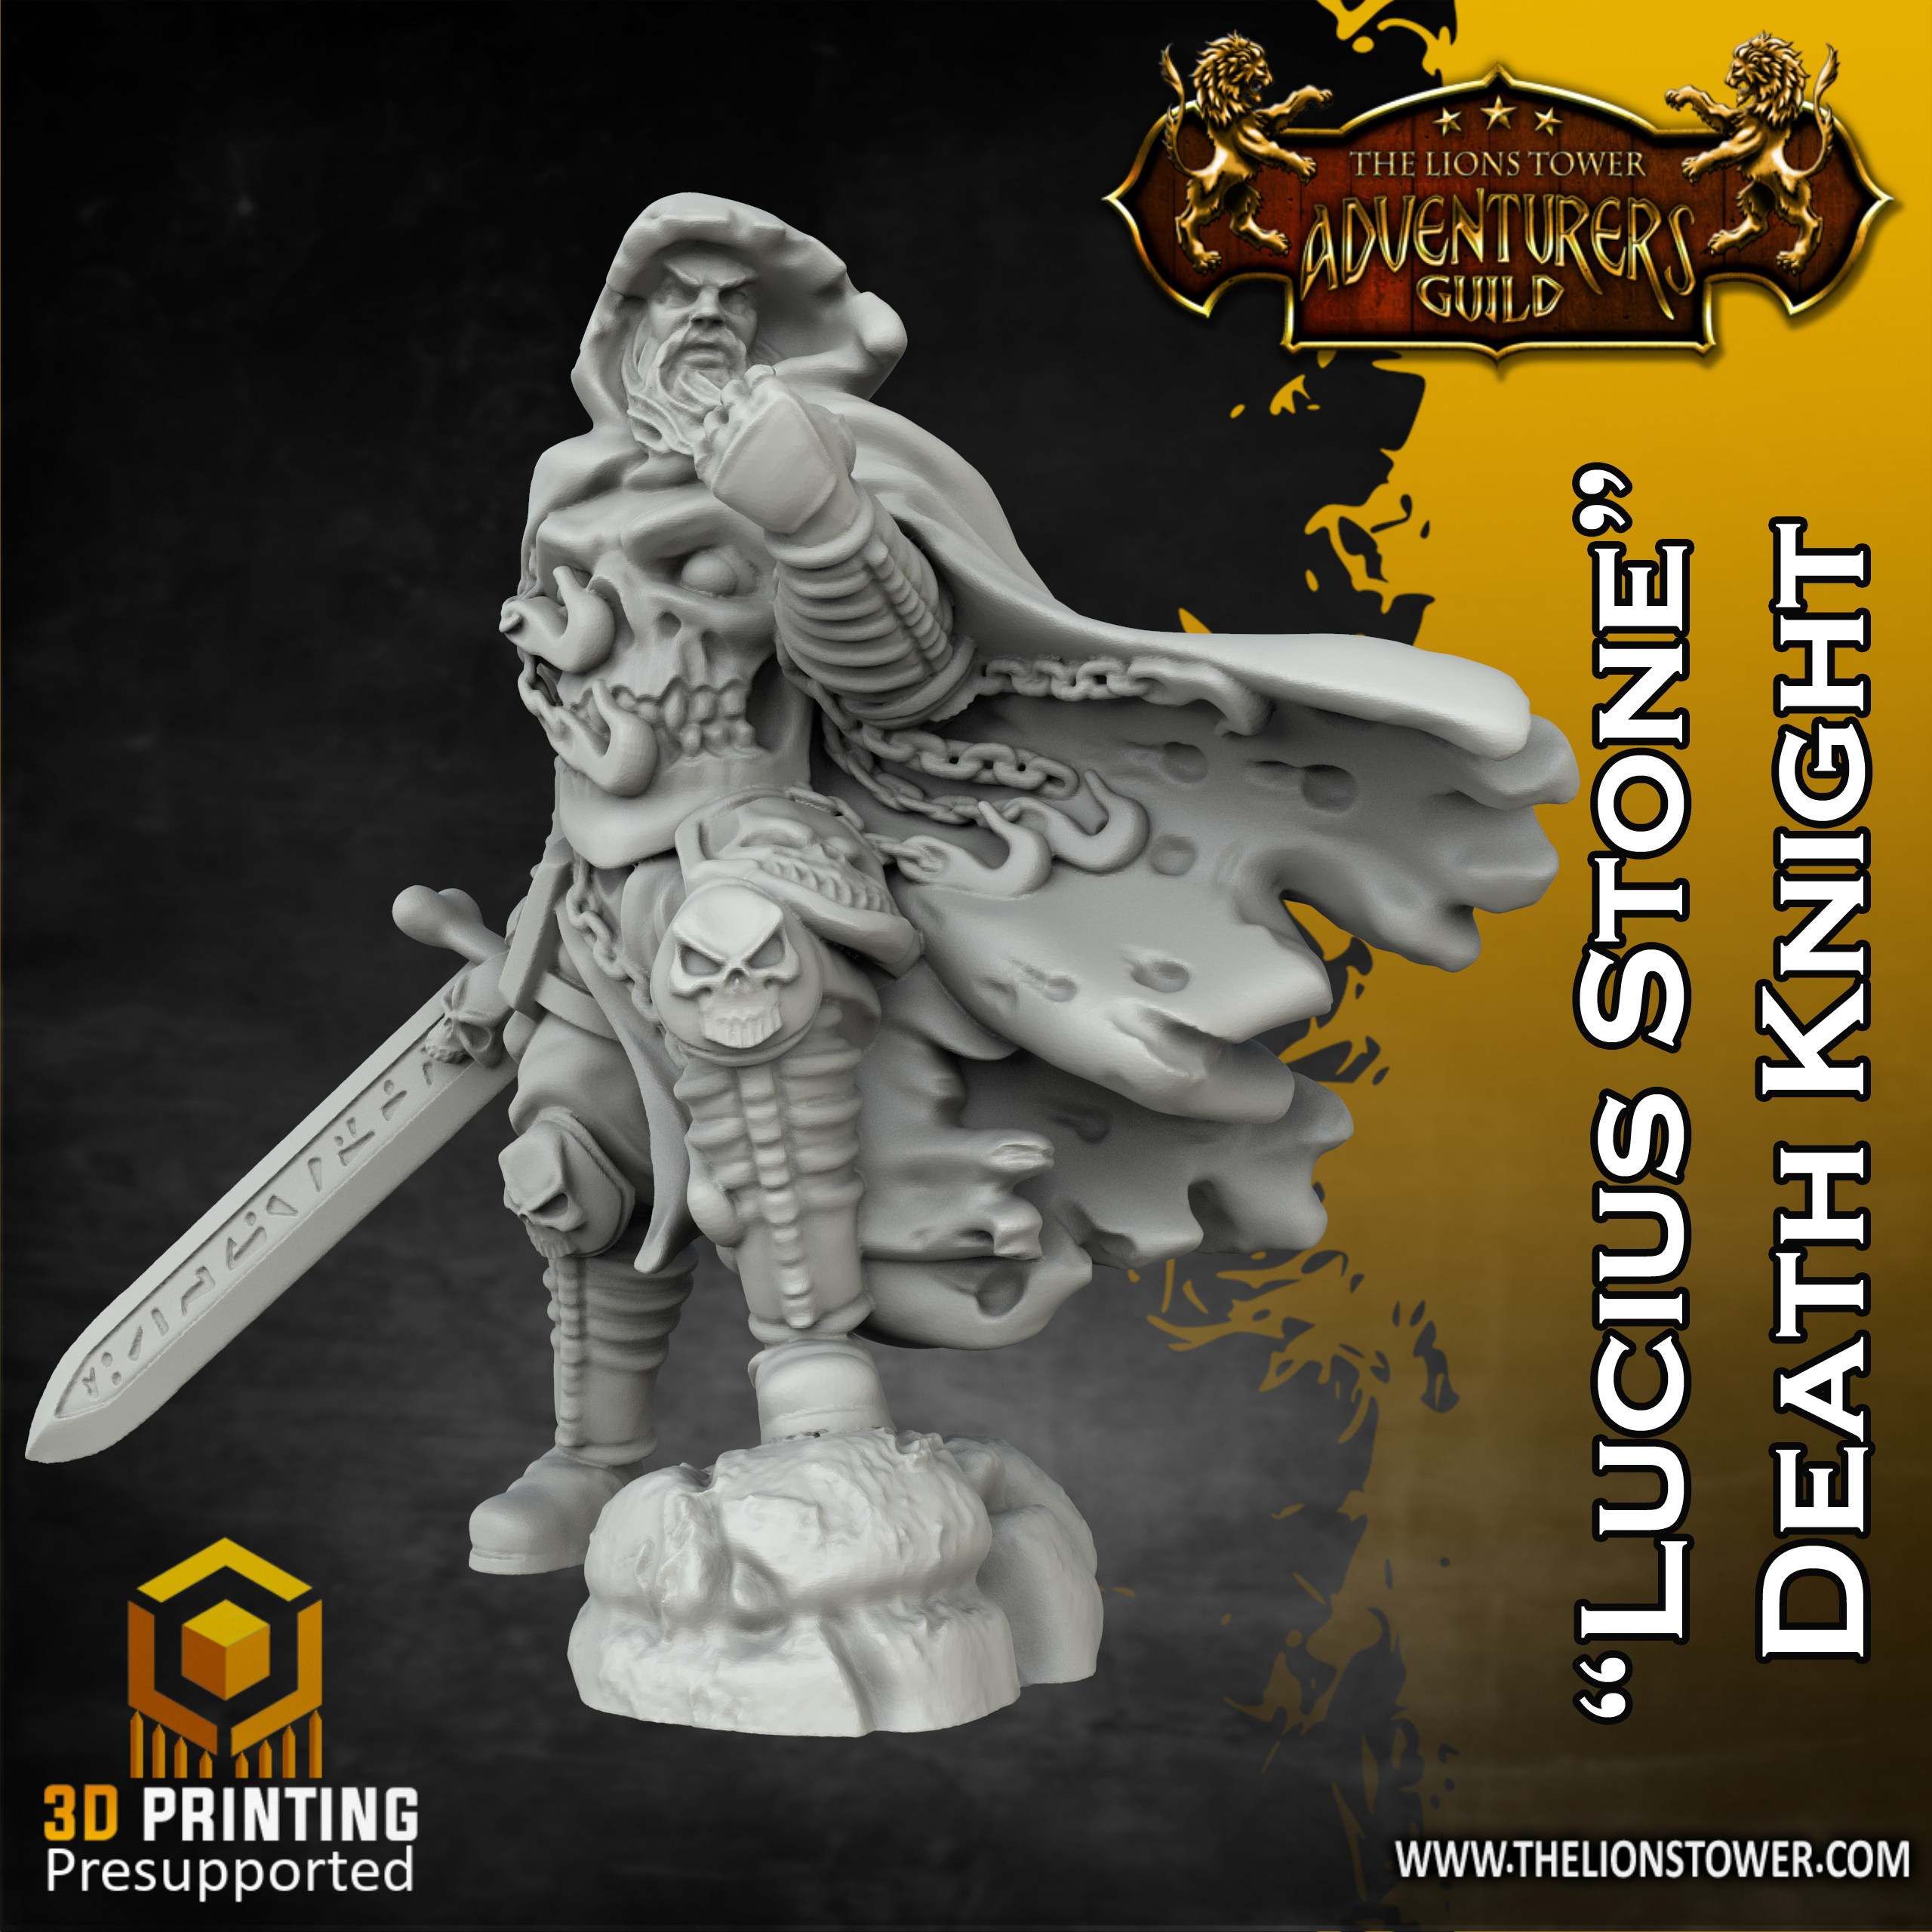 Lucius-Stone-Death-Knight.png Download file Lucius Stone - Death Knight (32MM SCALE, PRE-SUPPORTED MINIATURE) • 3D printable model, Lion_Tower